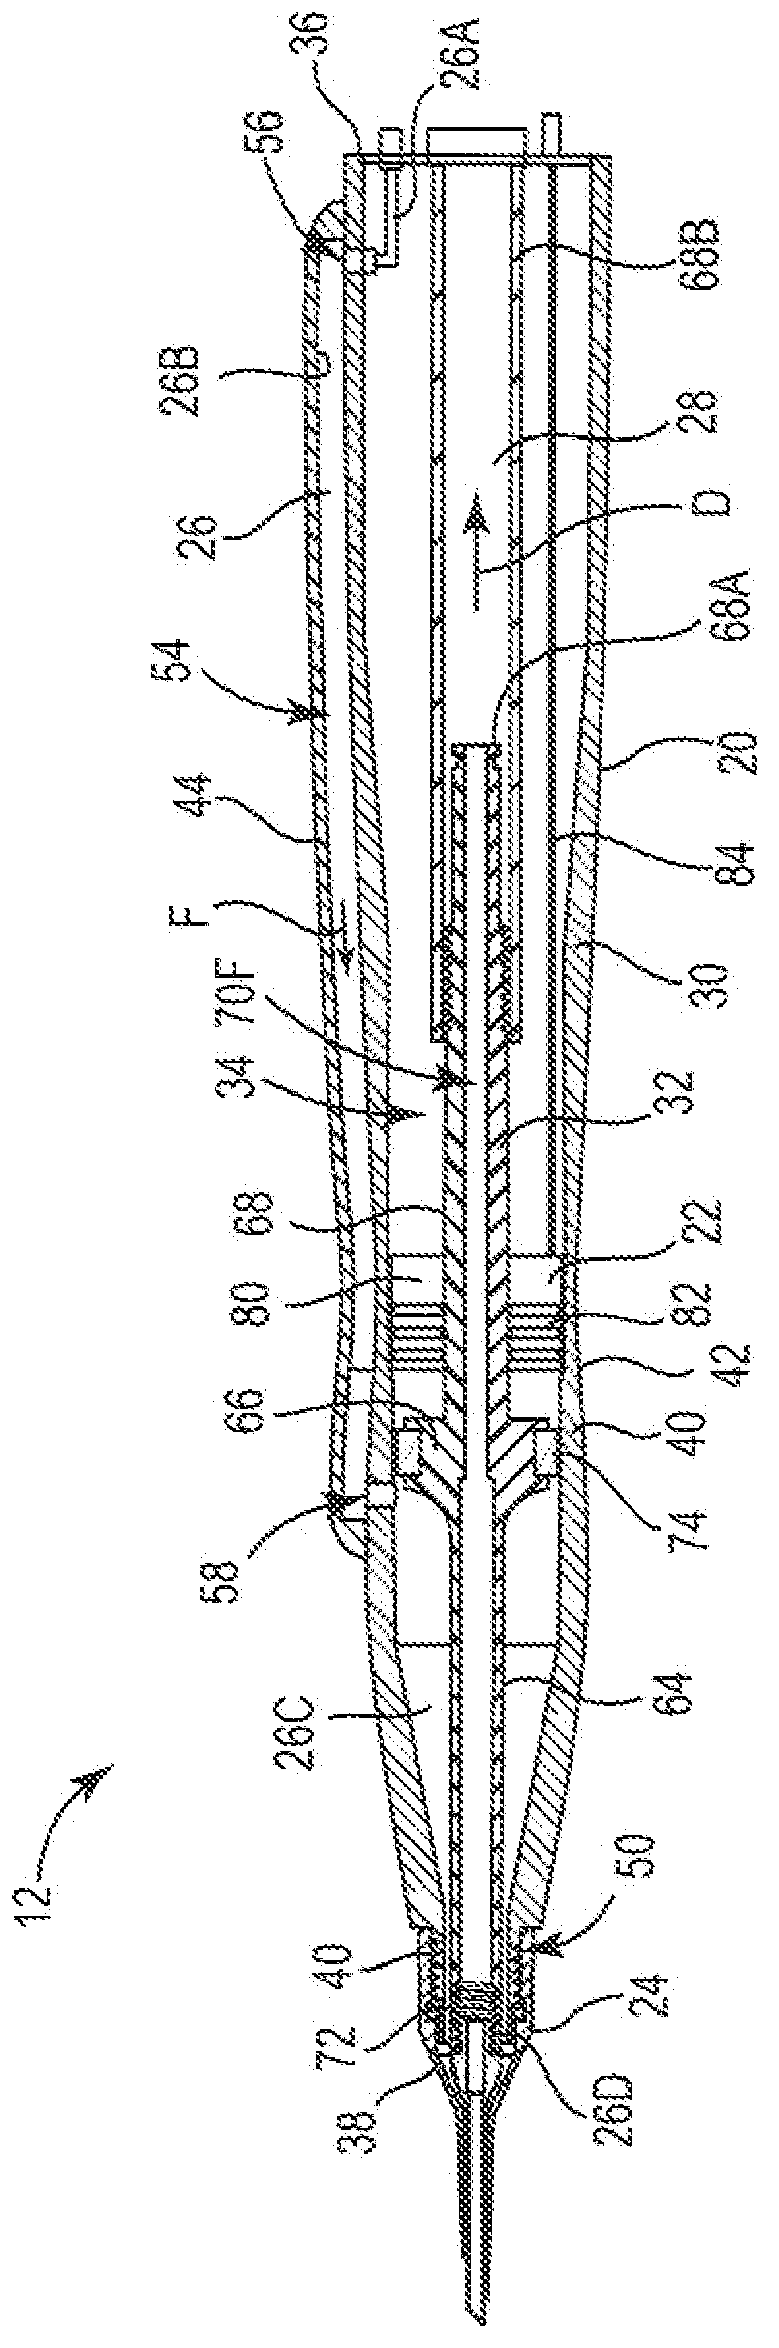 System and method for minimally invasive tissue treatment